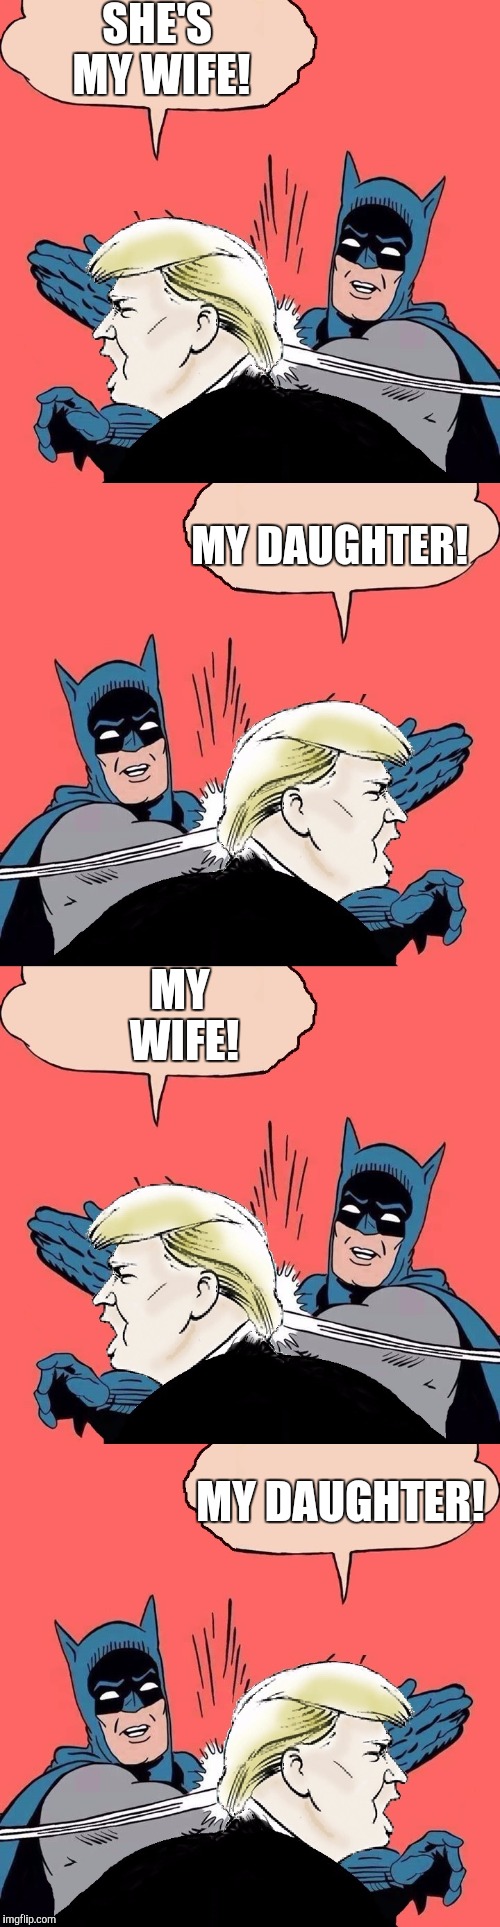 Batman & Trump in Chinatown Revisited | SHE'S MY WIFE! MY DAUGHTER! MY WIFE! MY DAUGHTER! | image tagged in memes,batman slaps trump | made w/ Imgflip meme maker